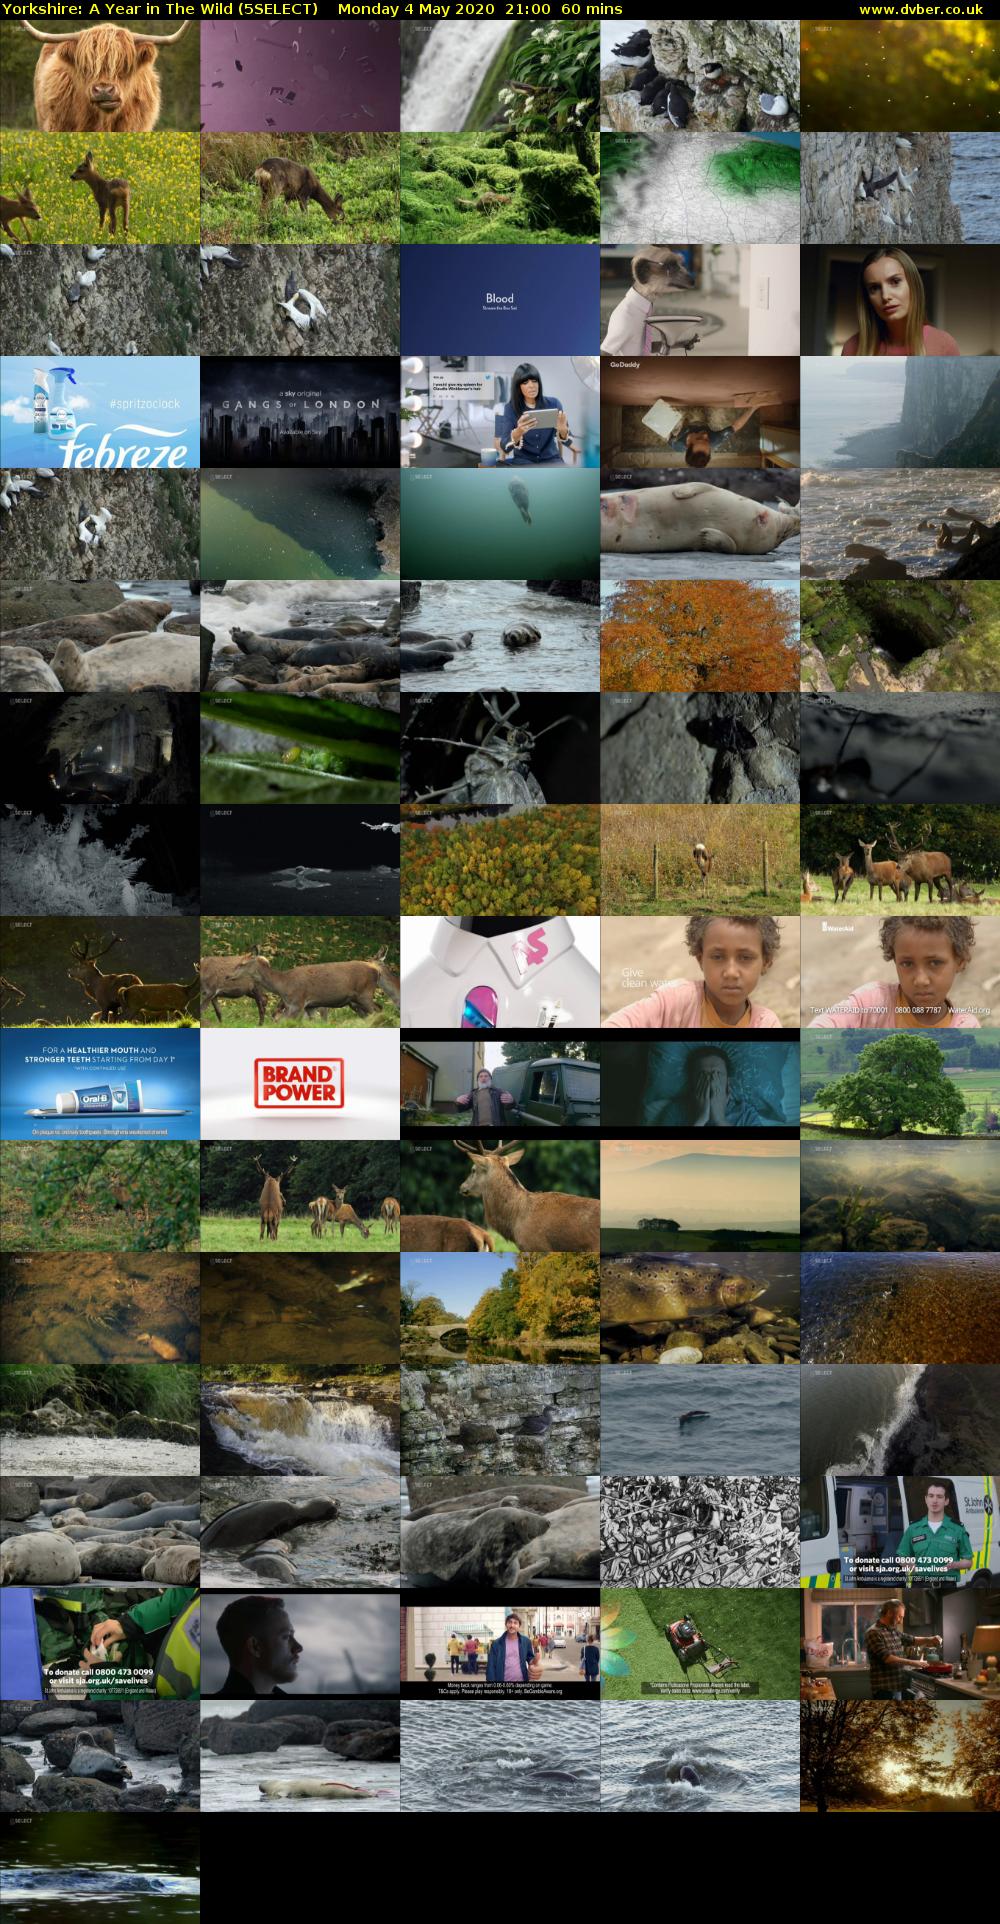 Yorkshire: A Year in The Wild (5SELECT) Monday 4 May 2020 21:00 - 22:00